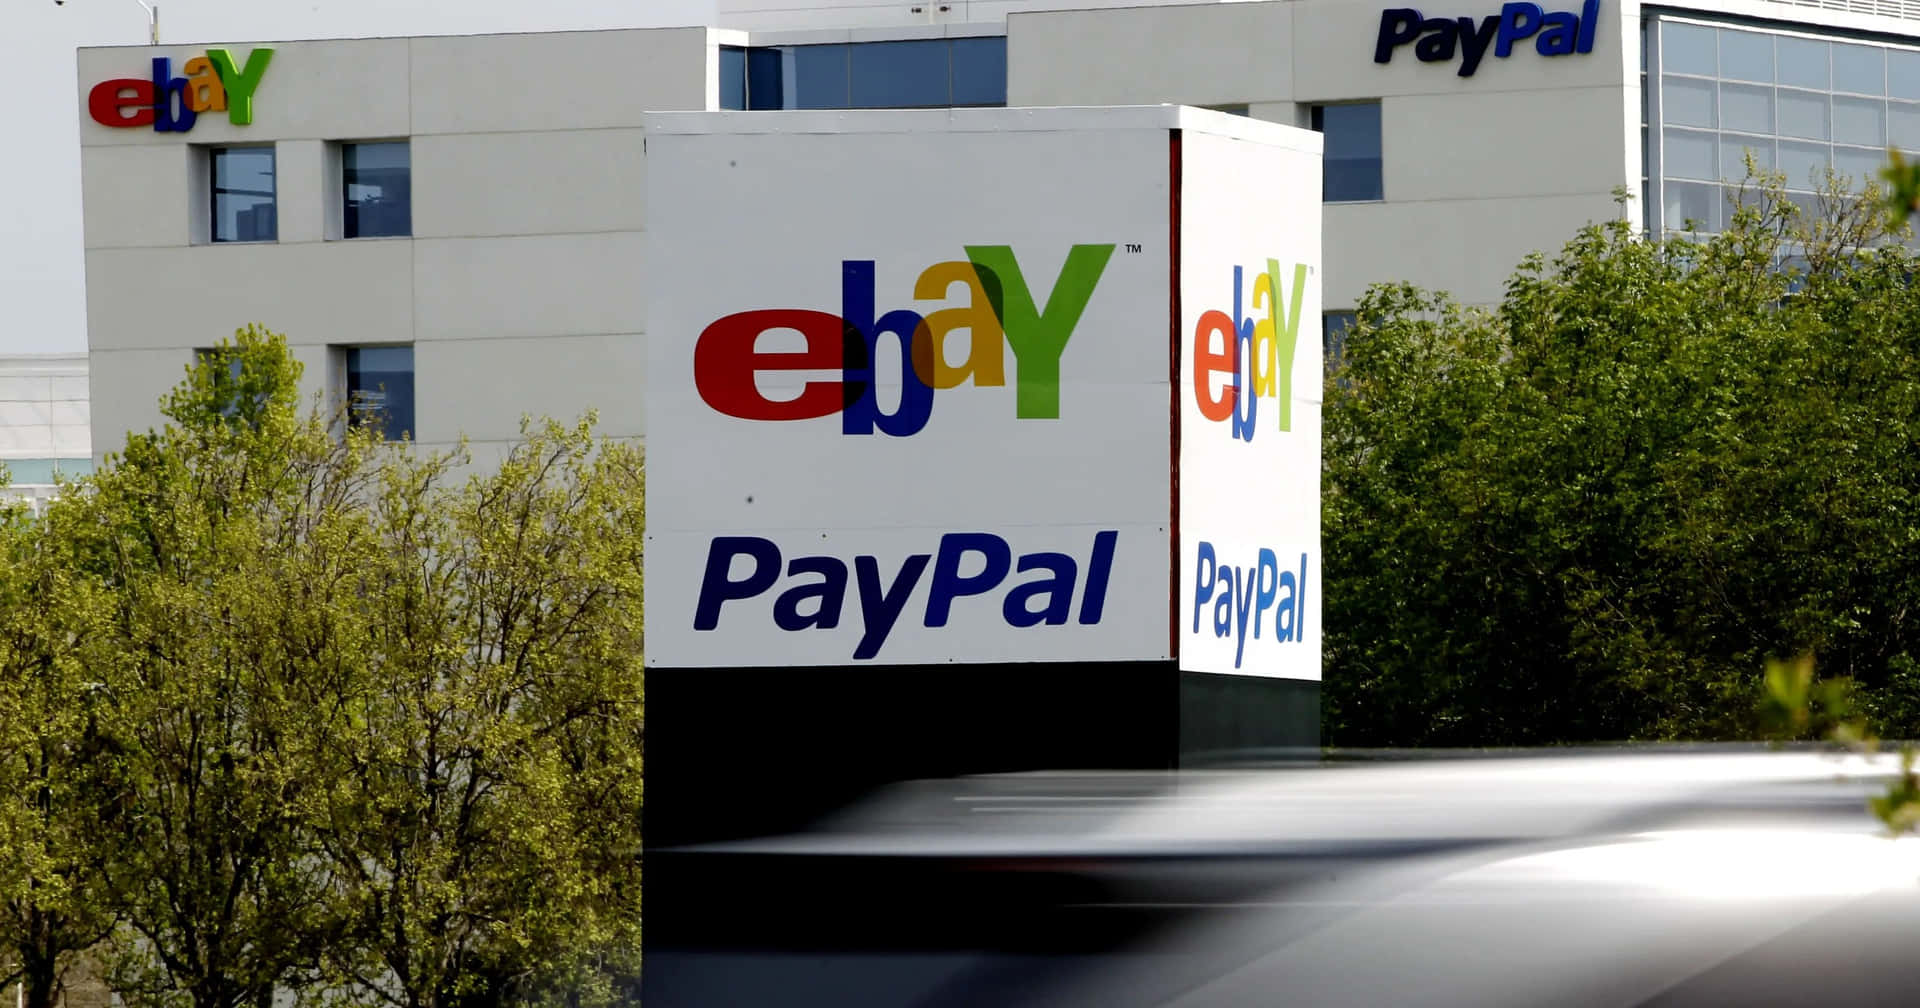 A Car Driving Past An Ebay Paypal Sign